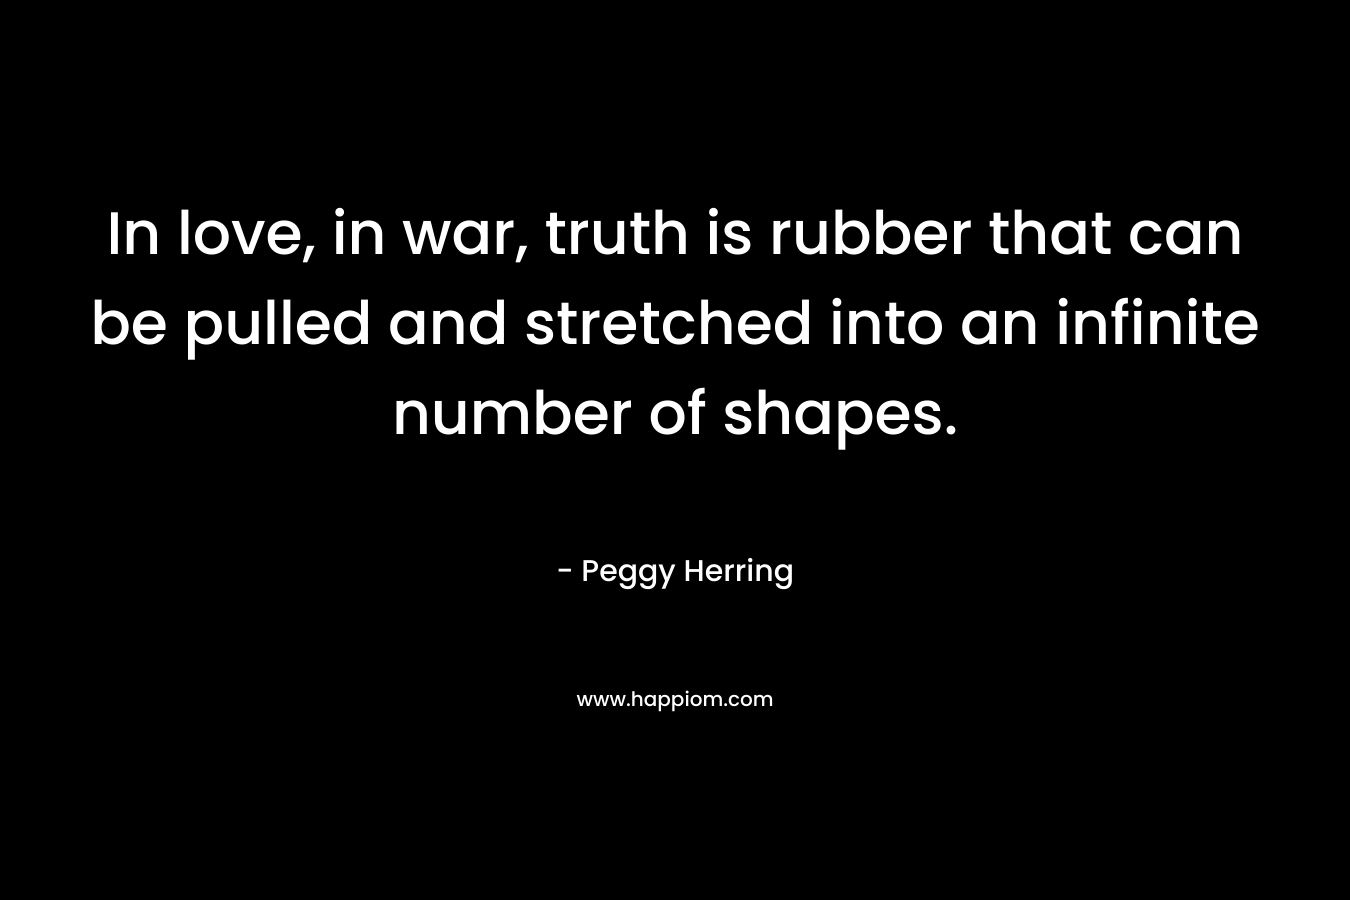 In love, in war, truth is rubber that can be pulled and stretched into an infinite number of shapes.